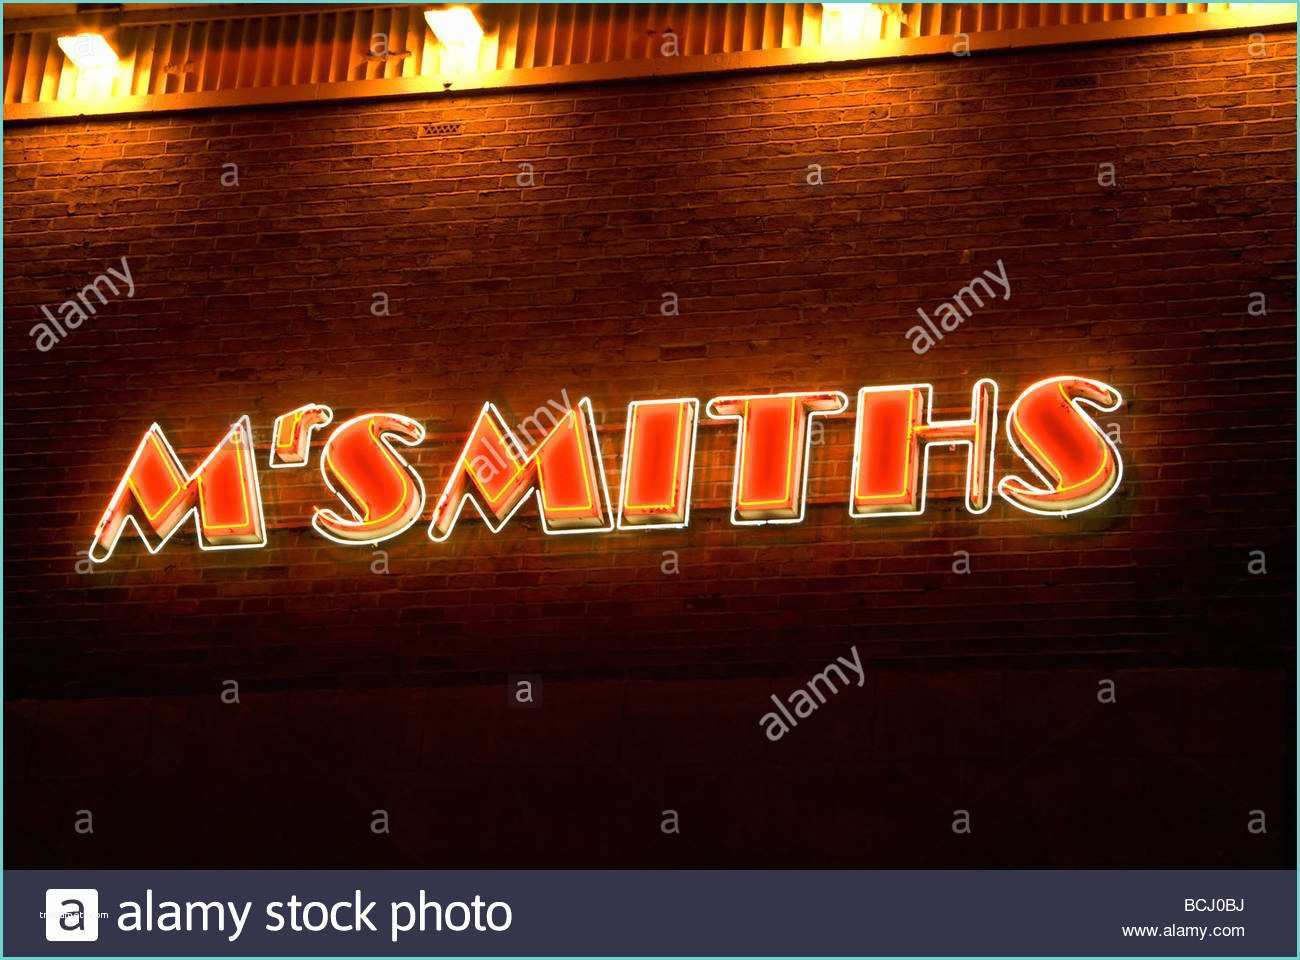 Neon Light Signs Warrington Art Deco Neon Sign On Side Of Building Mr Smiths